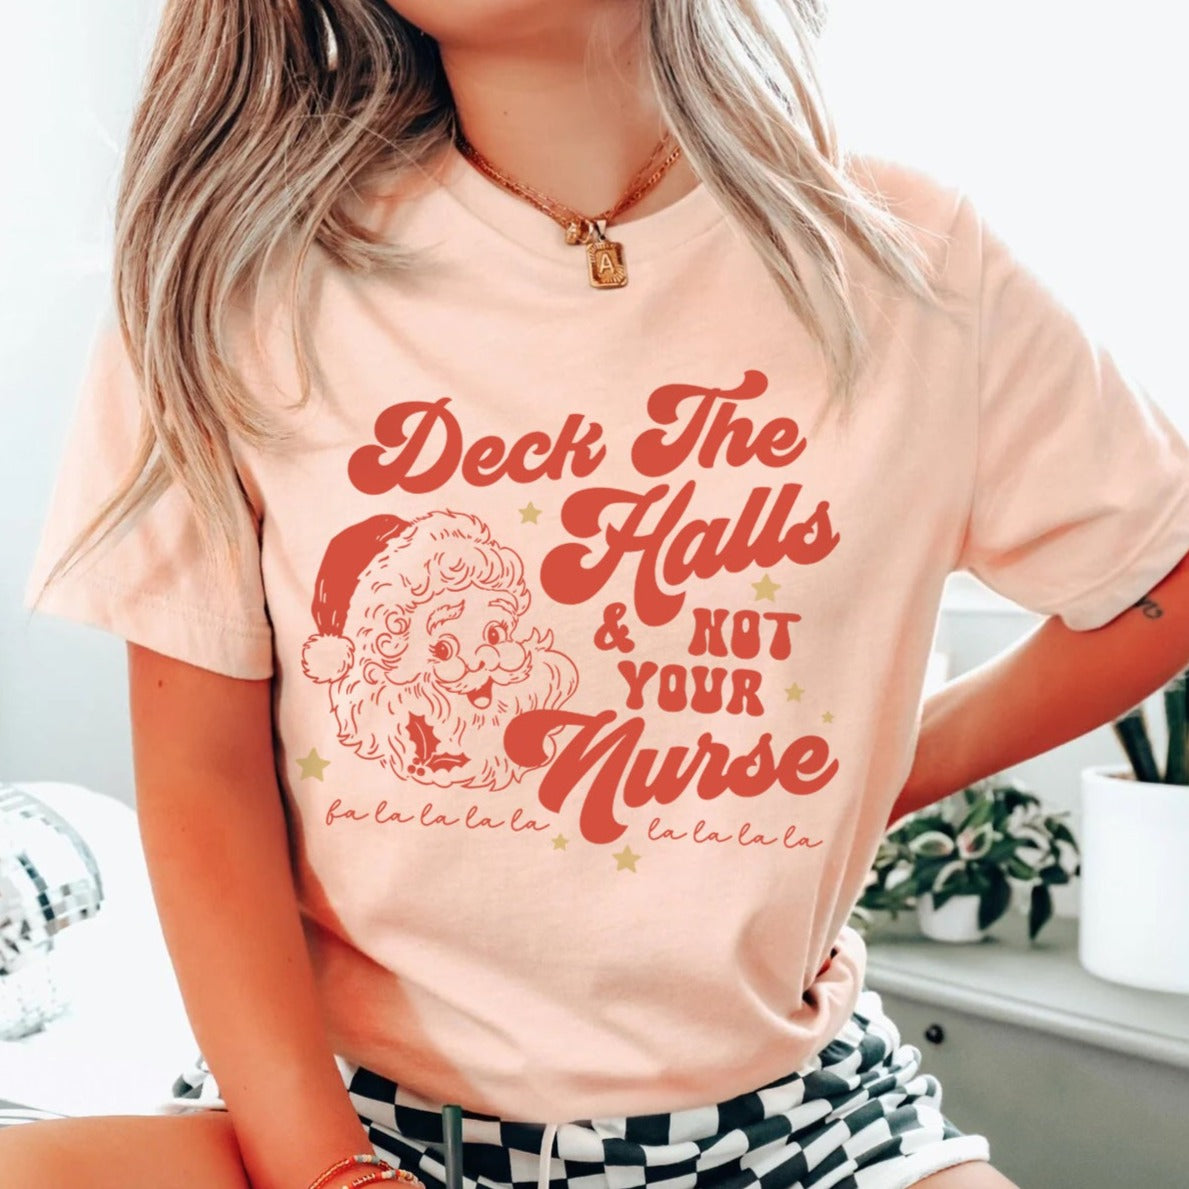 Deck the Halls and Not Your Nurse T-Shirt